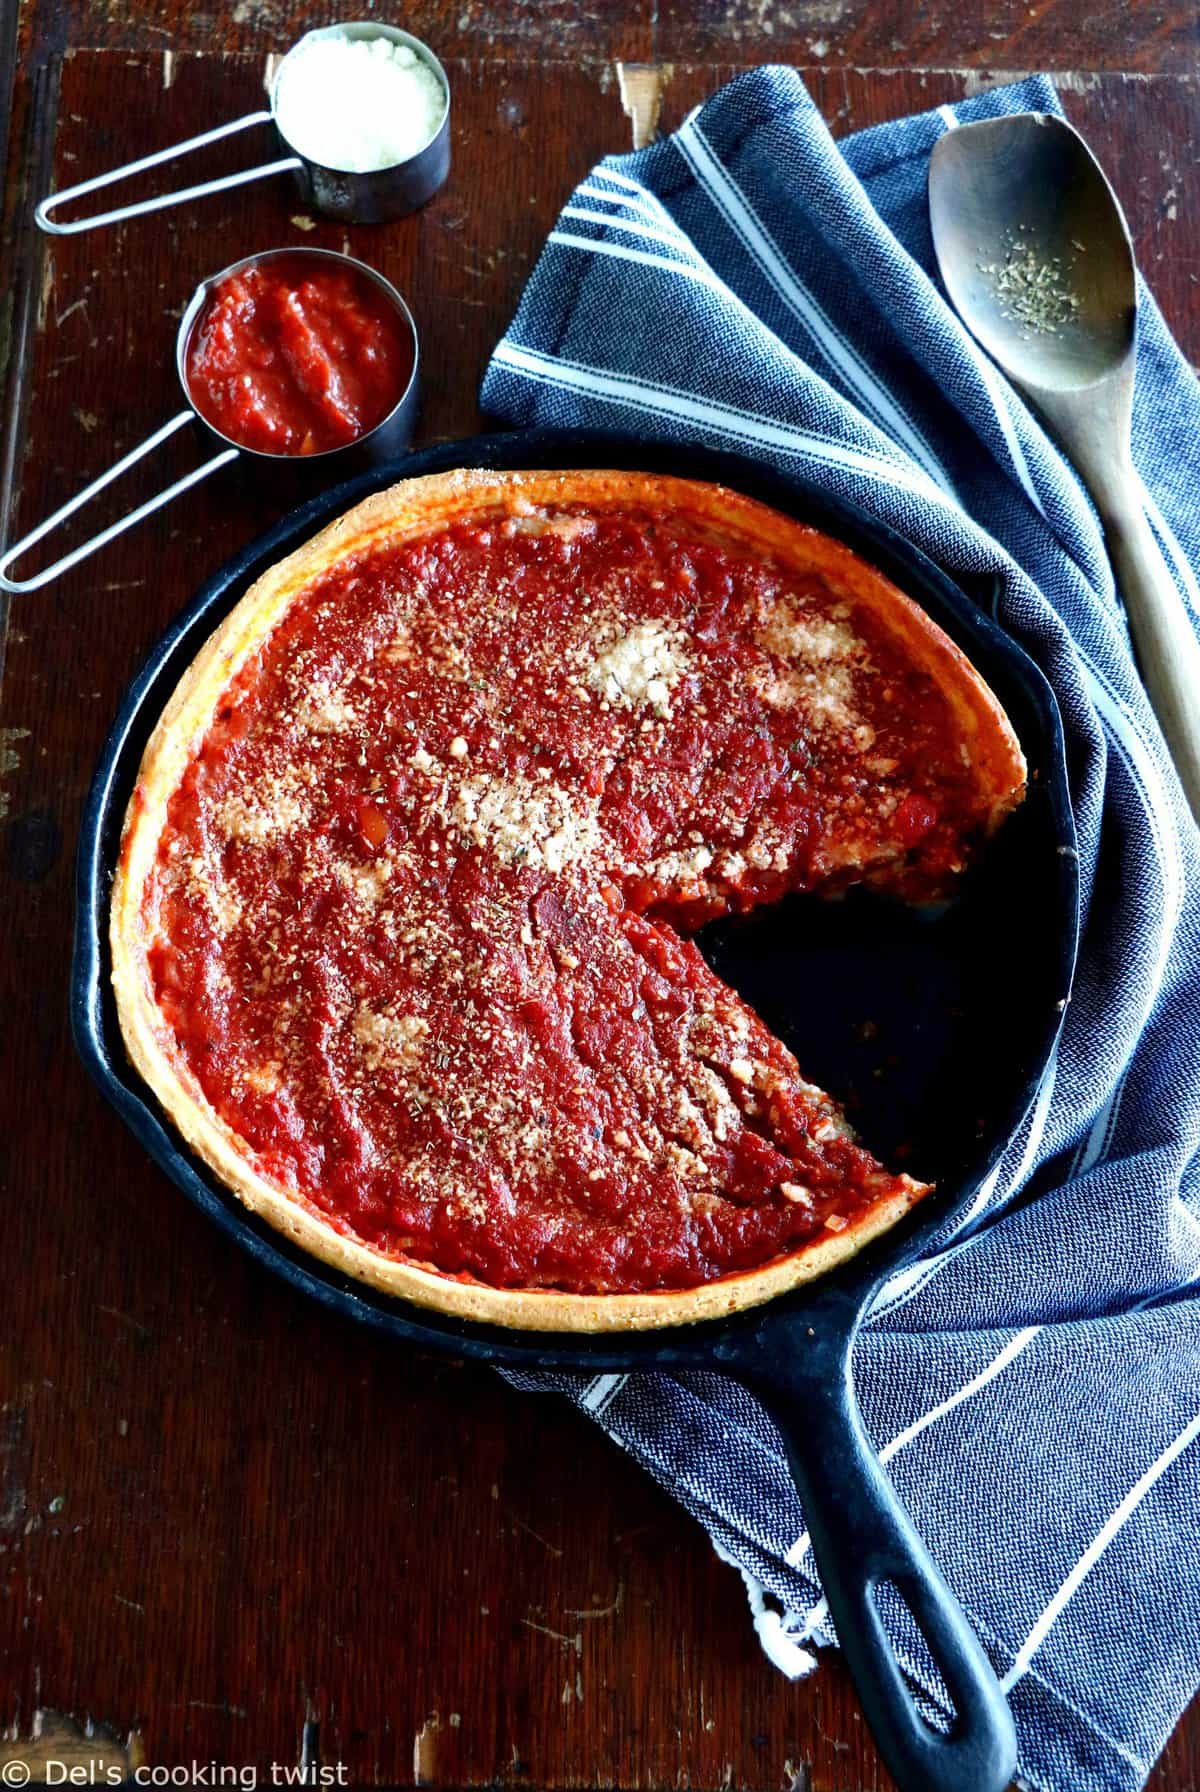 Cast Iron Deep Dish Pizza Recipe (Chicago-Style!) - A Spicy Perspective